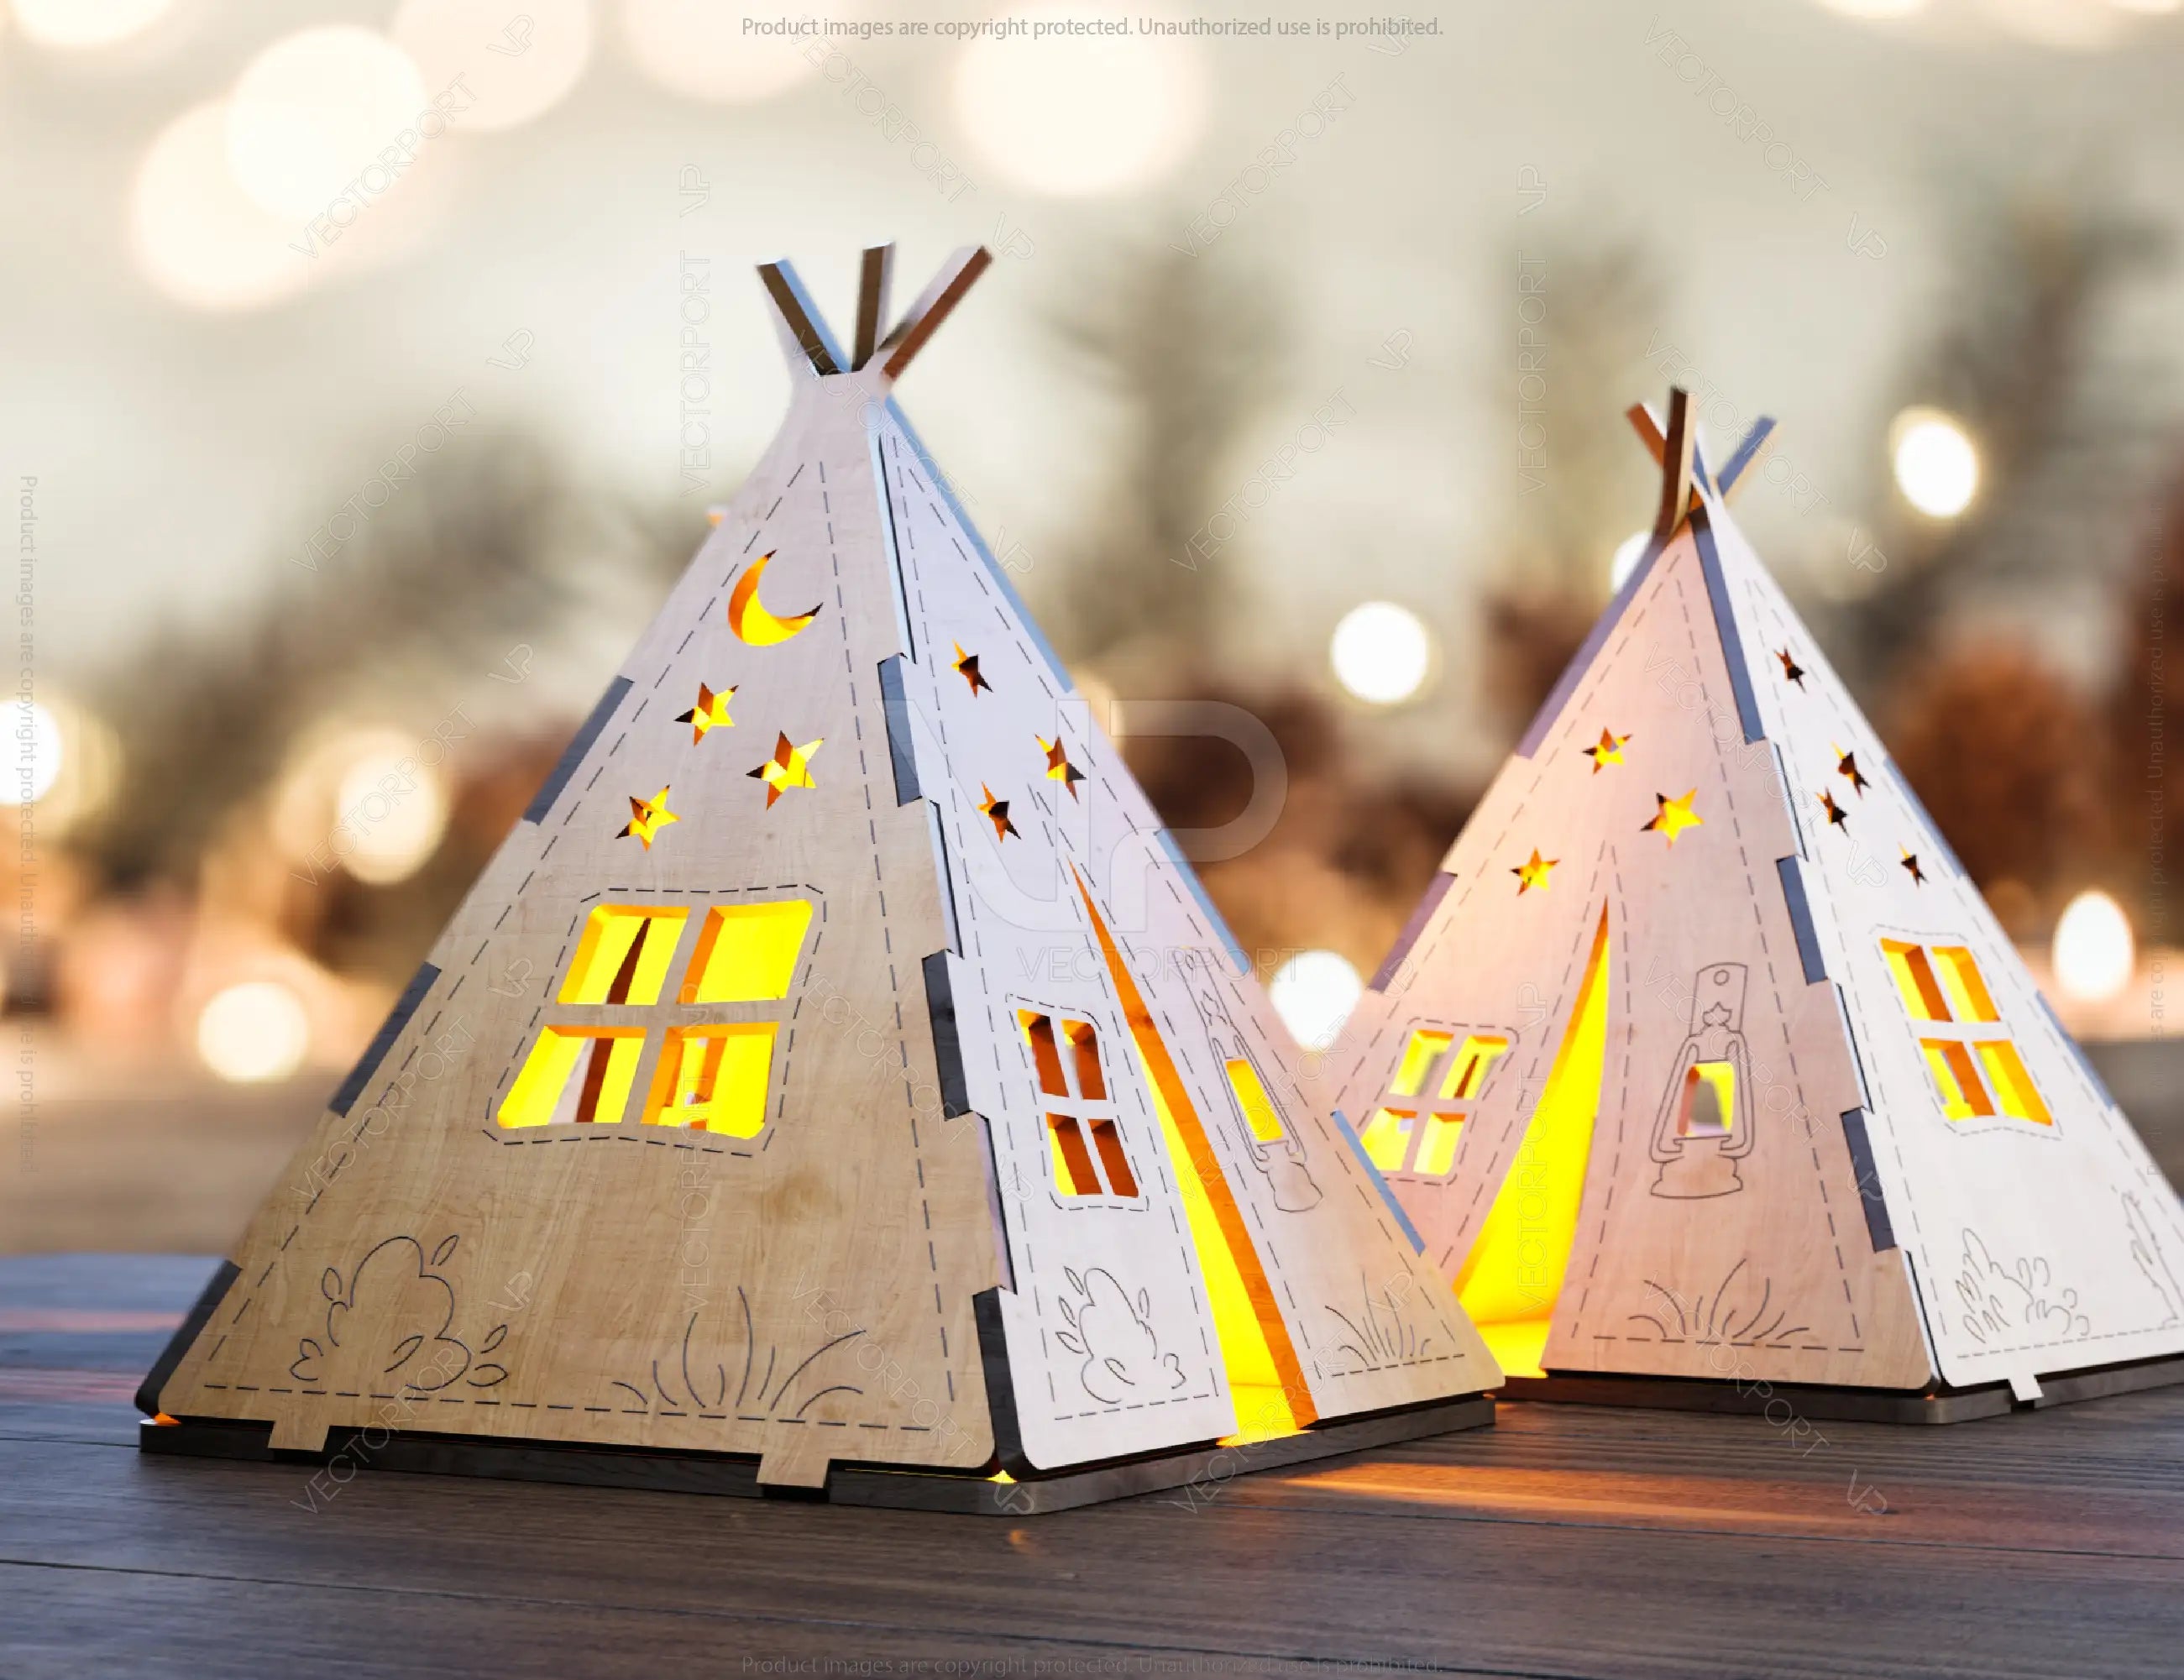 3D Laser Cut Wooden Tent Shape Night Lamp Plywood Laser Cutting Camping Home Lampshade Table Candle Holder Tea light | SVG, DXF, AI |#132|